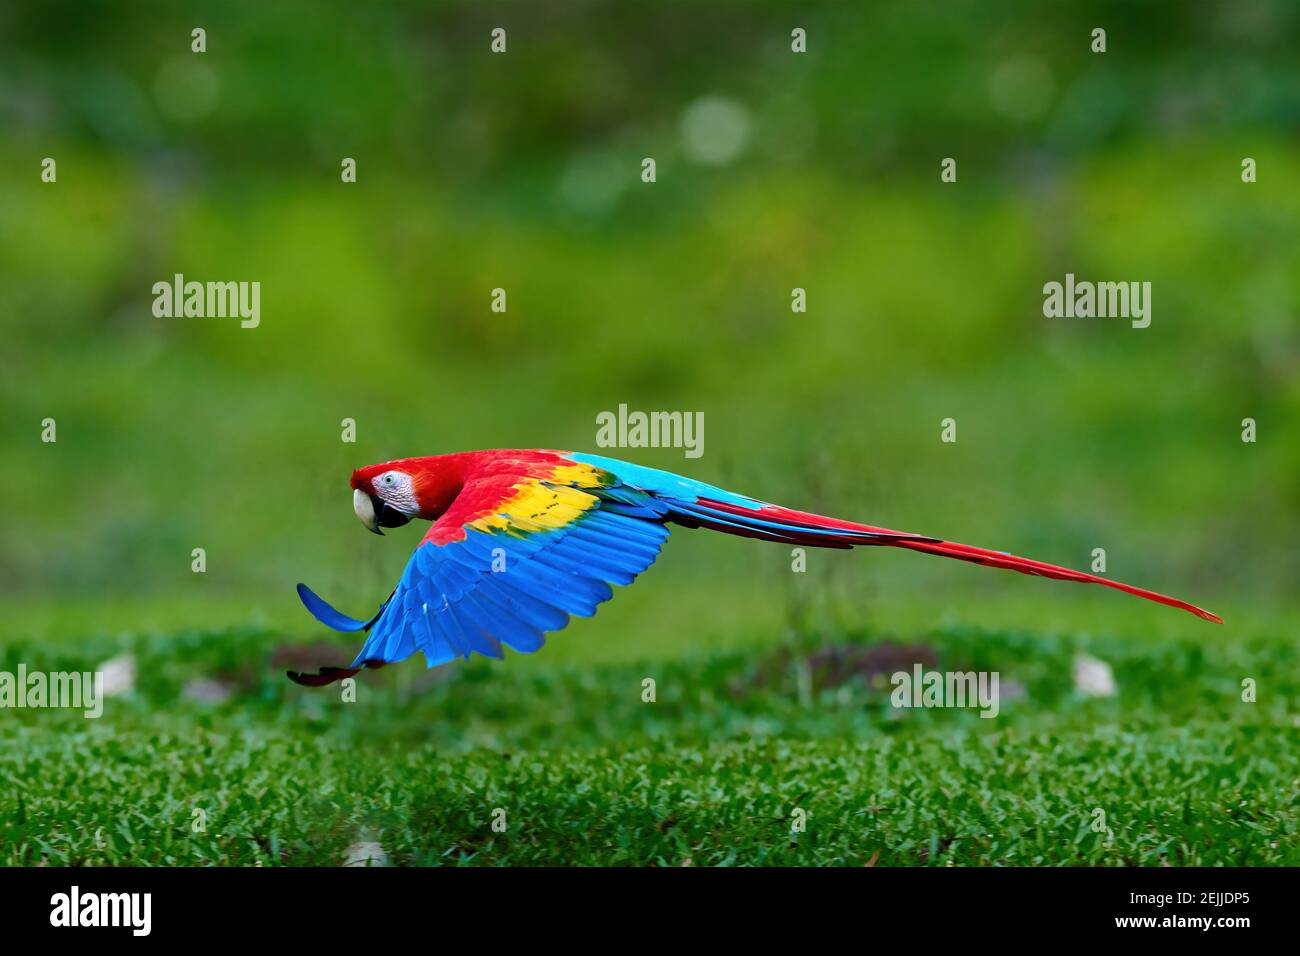 Flying ara parrot, isolated on blurred green background. Bright red and blue south american parrot,  Ara macao, Scarlet Macaw, flying with outstretche Stock Photo